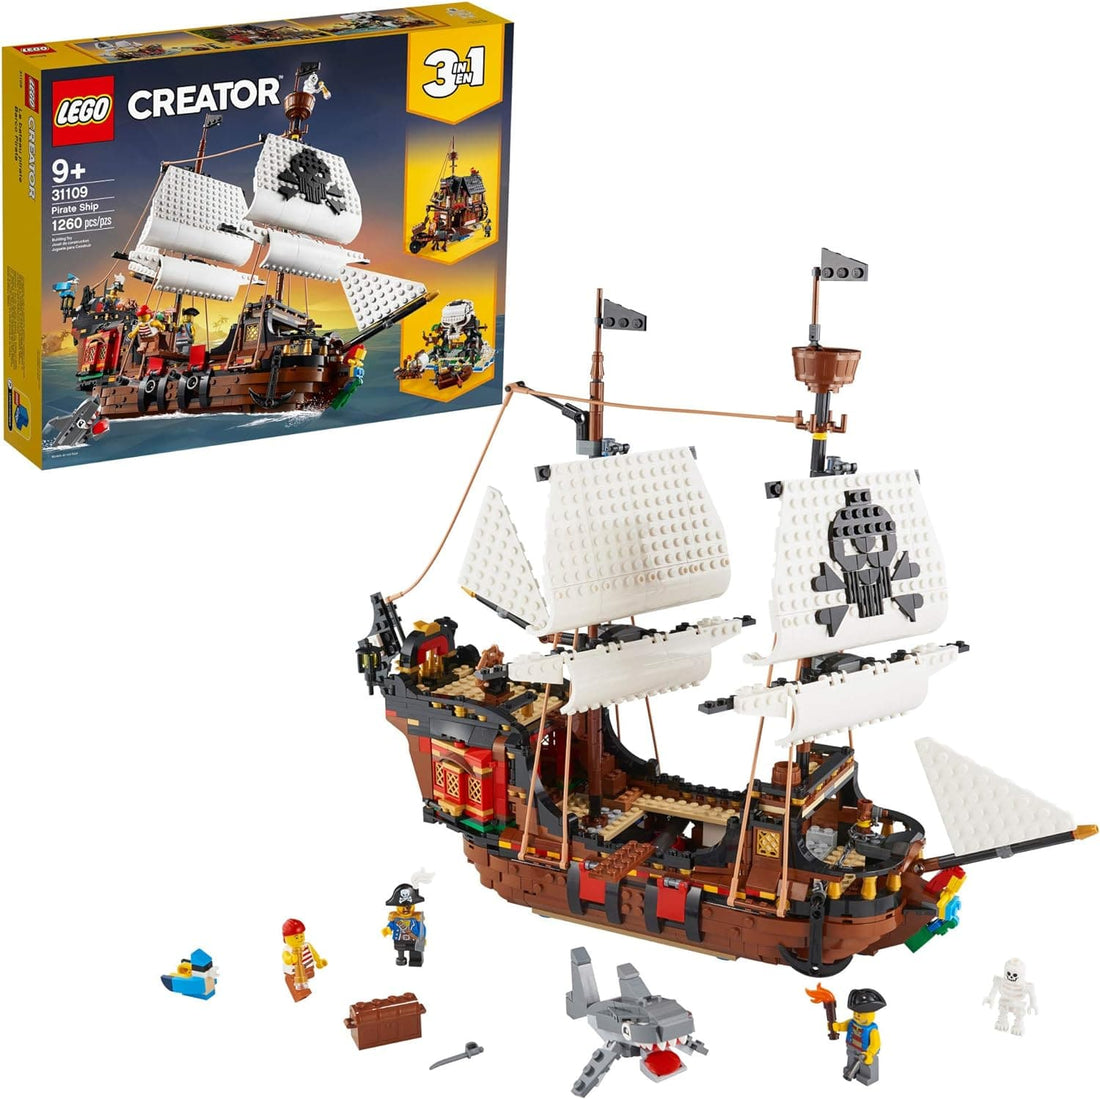 LEGO Creator 3in1 Pirate Ship Building Set - Toy Ship with Inn, Skull Island, Featuring 4 Minifigures, Shark Figure - best price from Maltashopper.com 31109